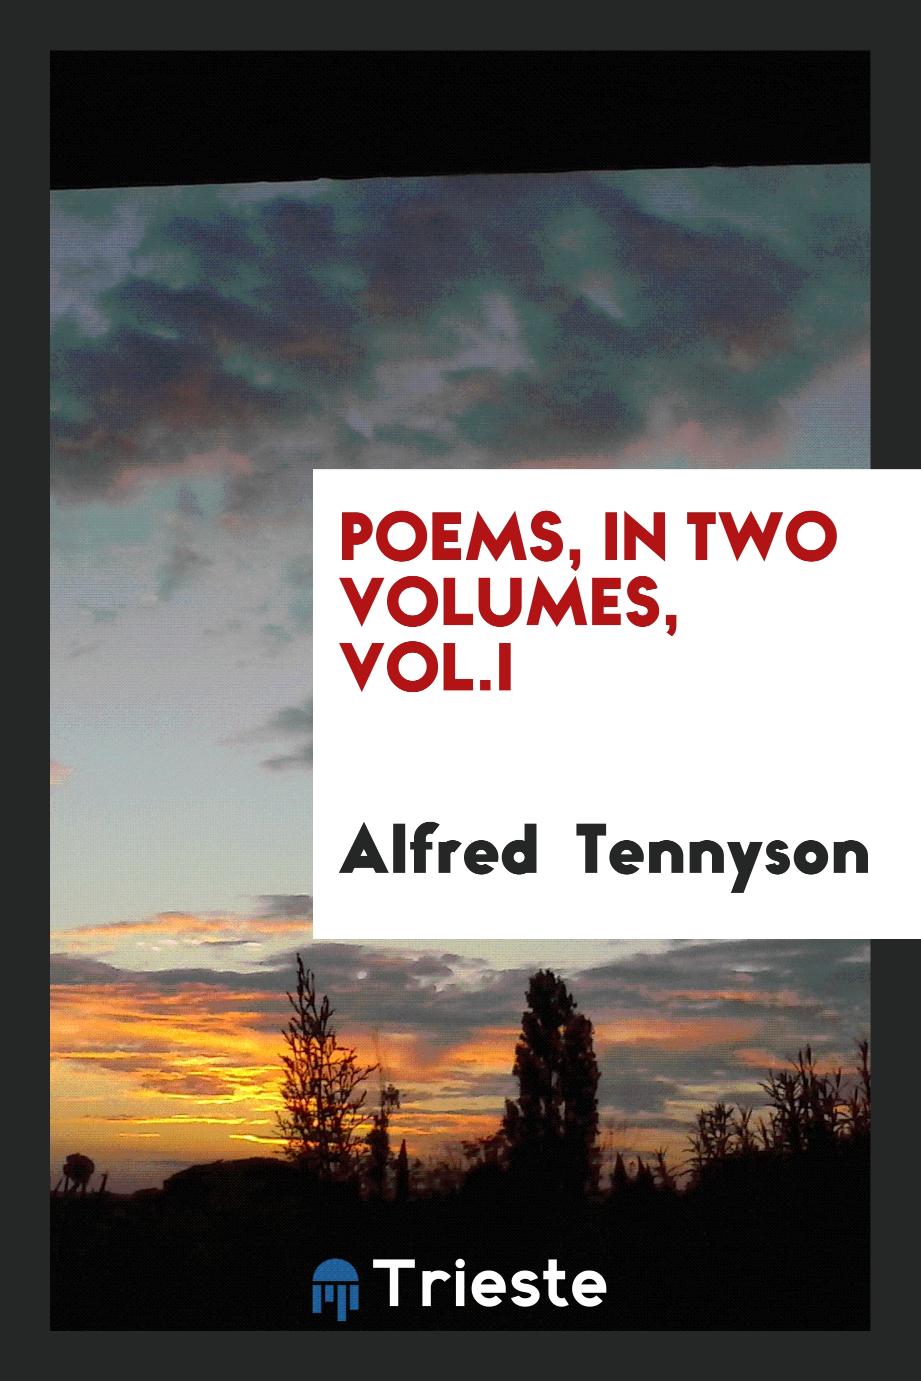 Poems, in two volumes, Vol.I